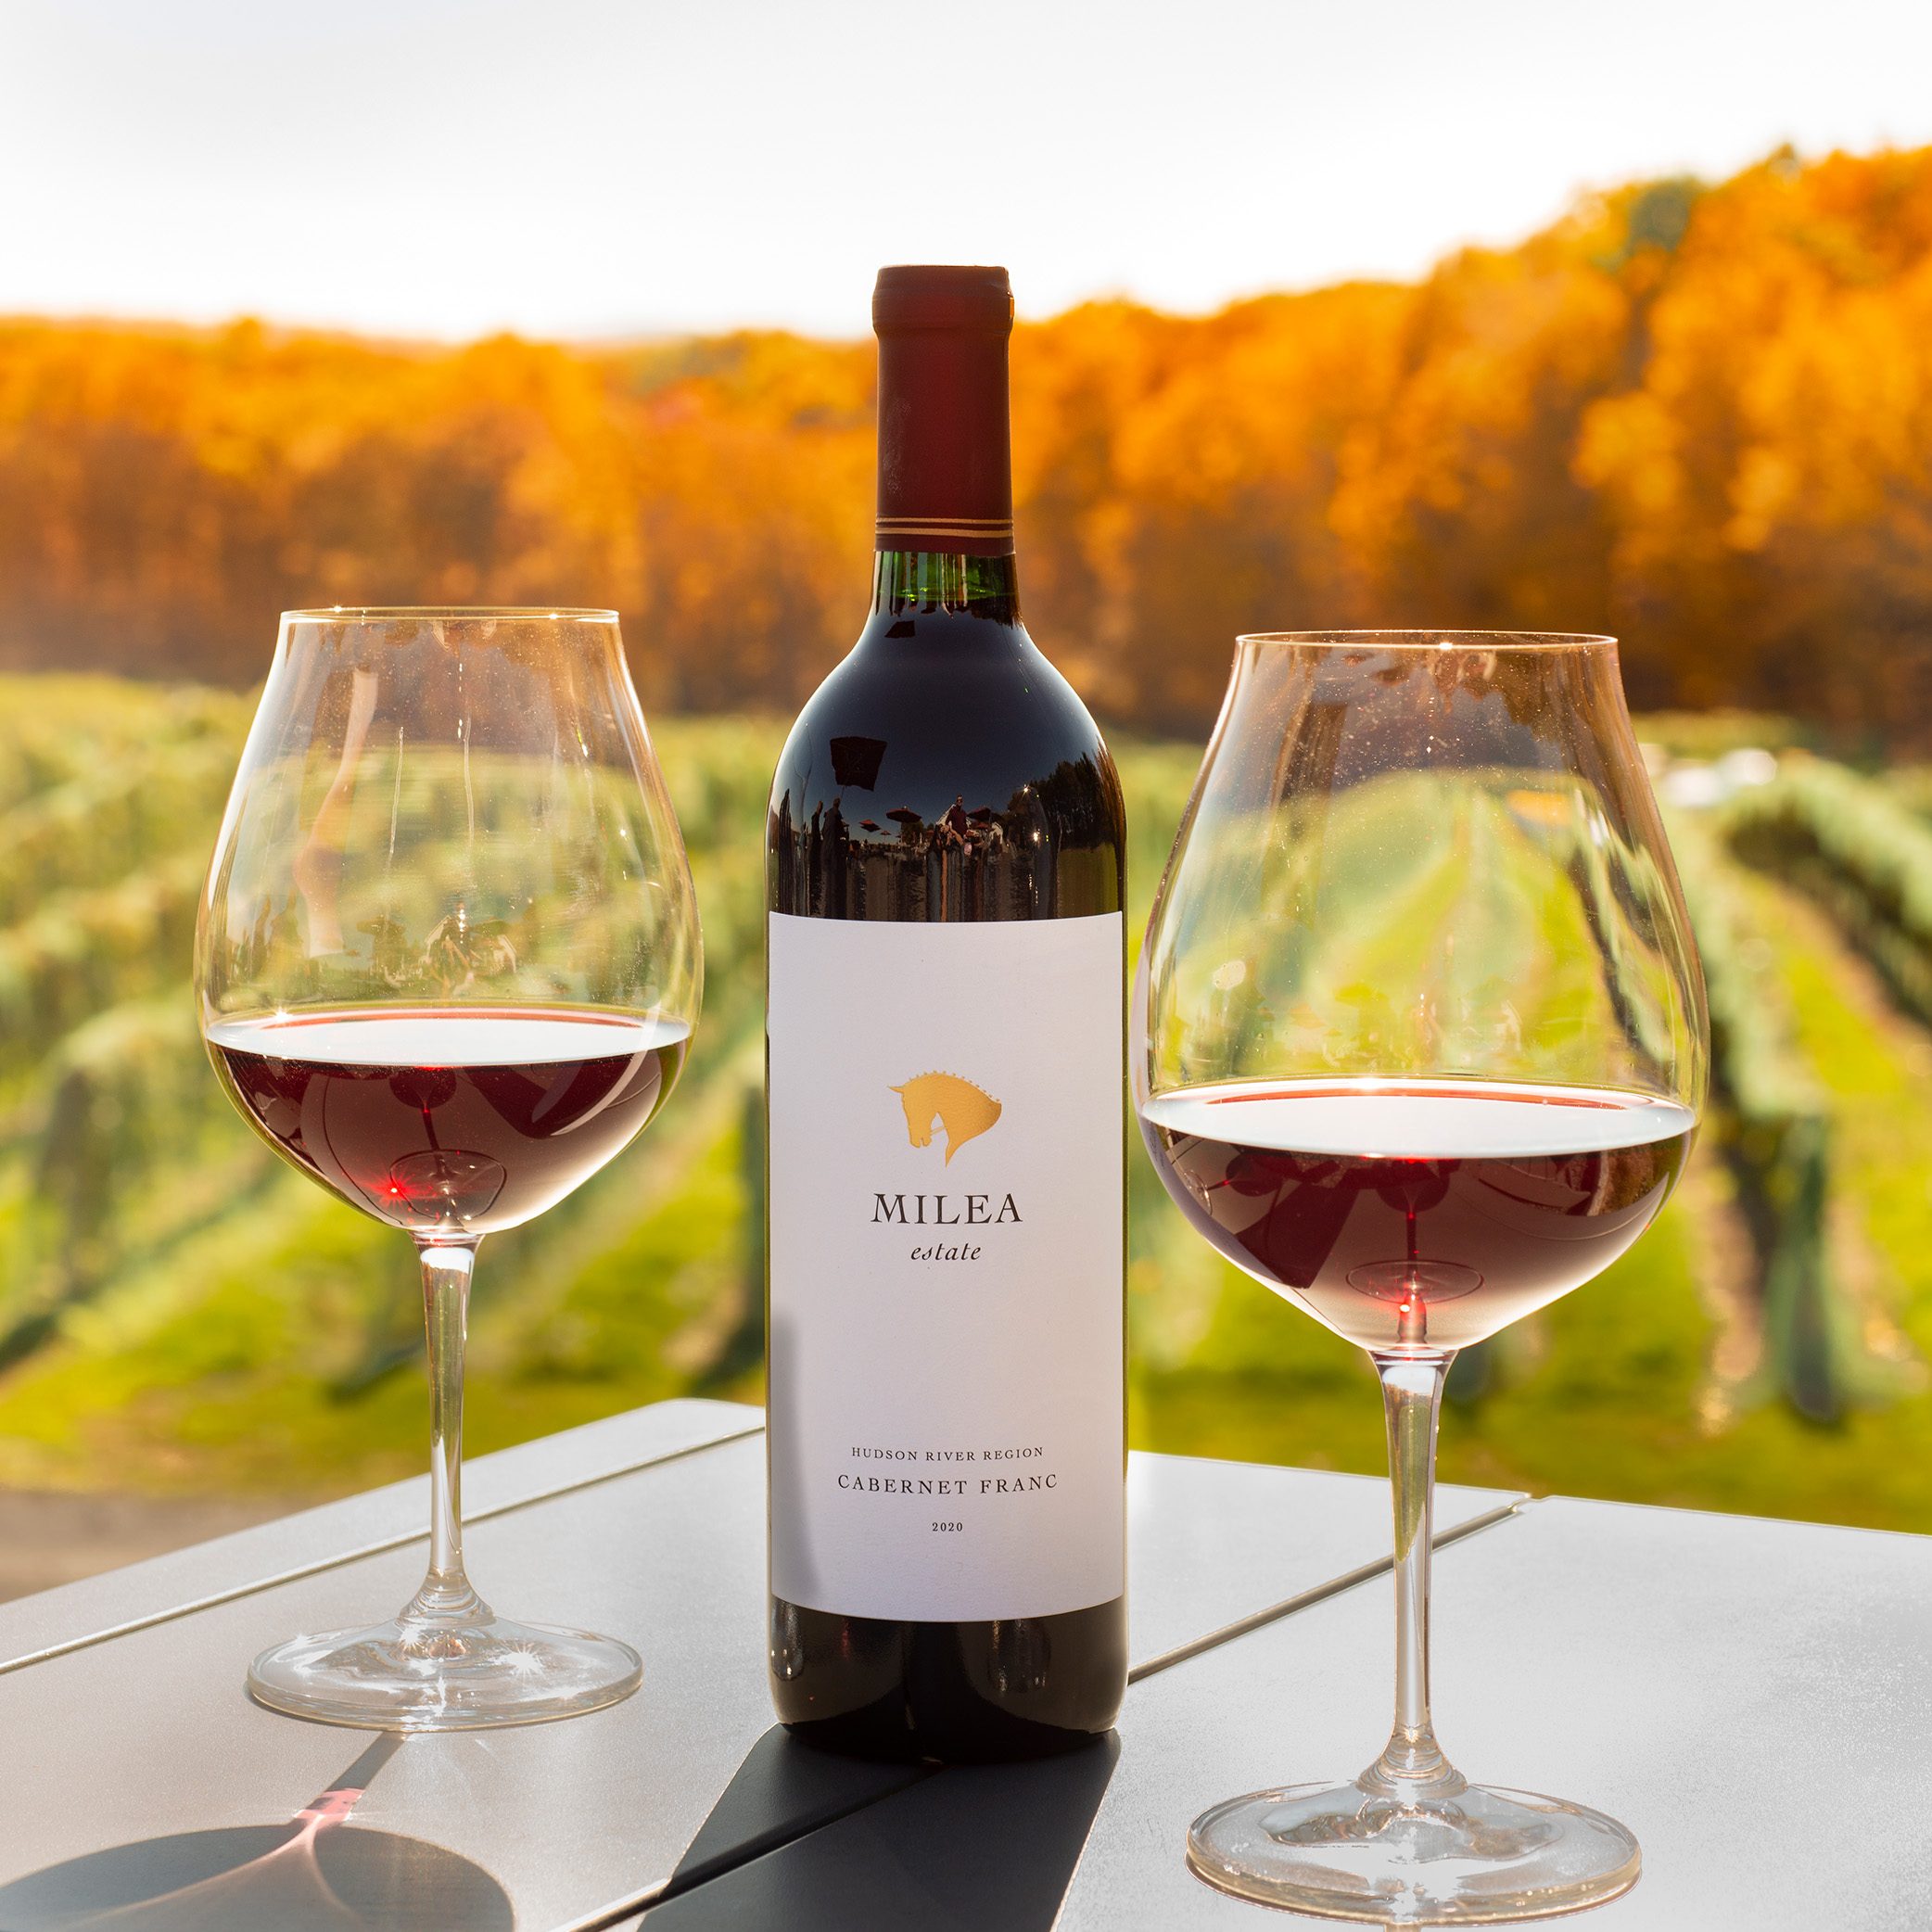 A bottle of wine and two wineglasses from Milea Estate Vineyard